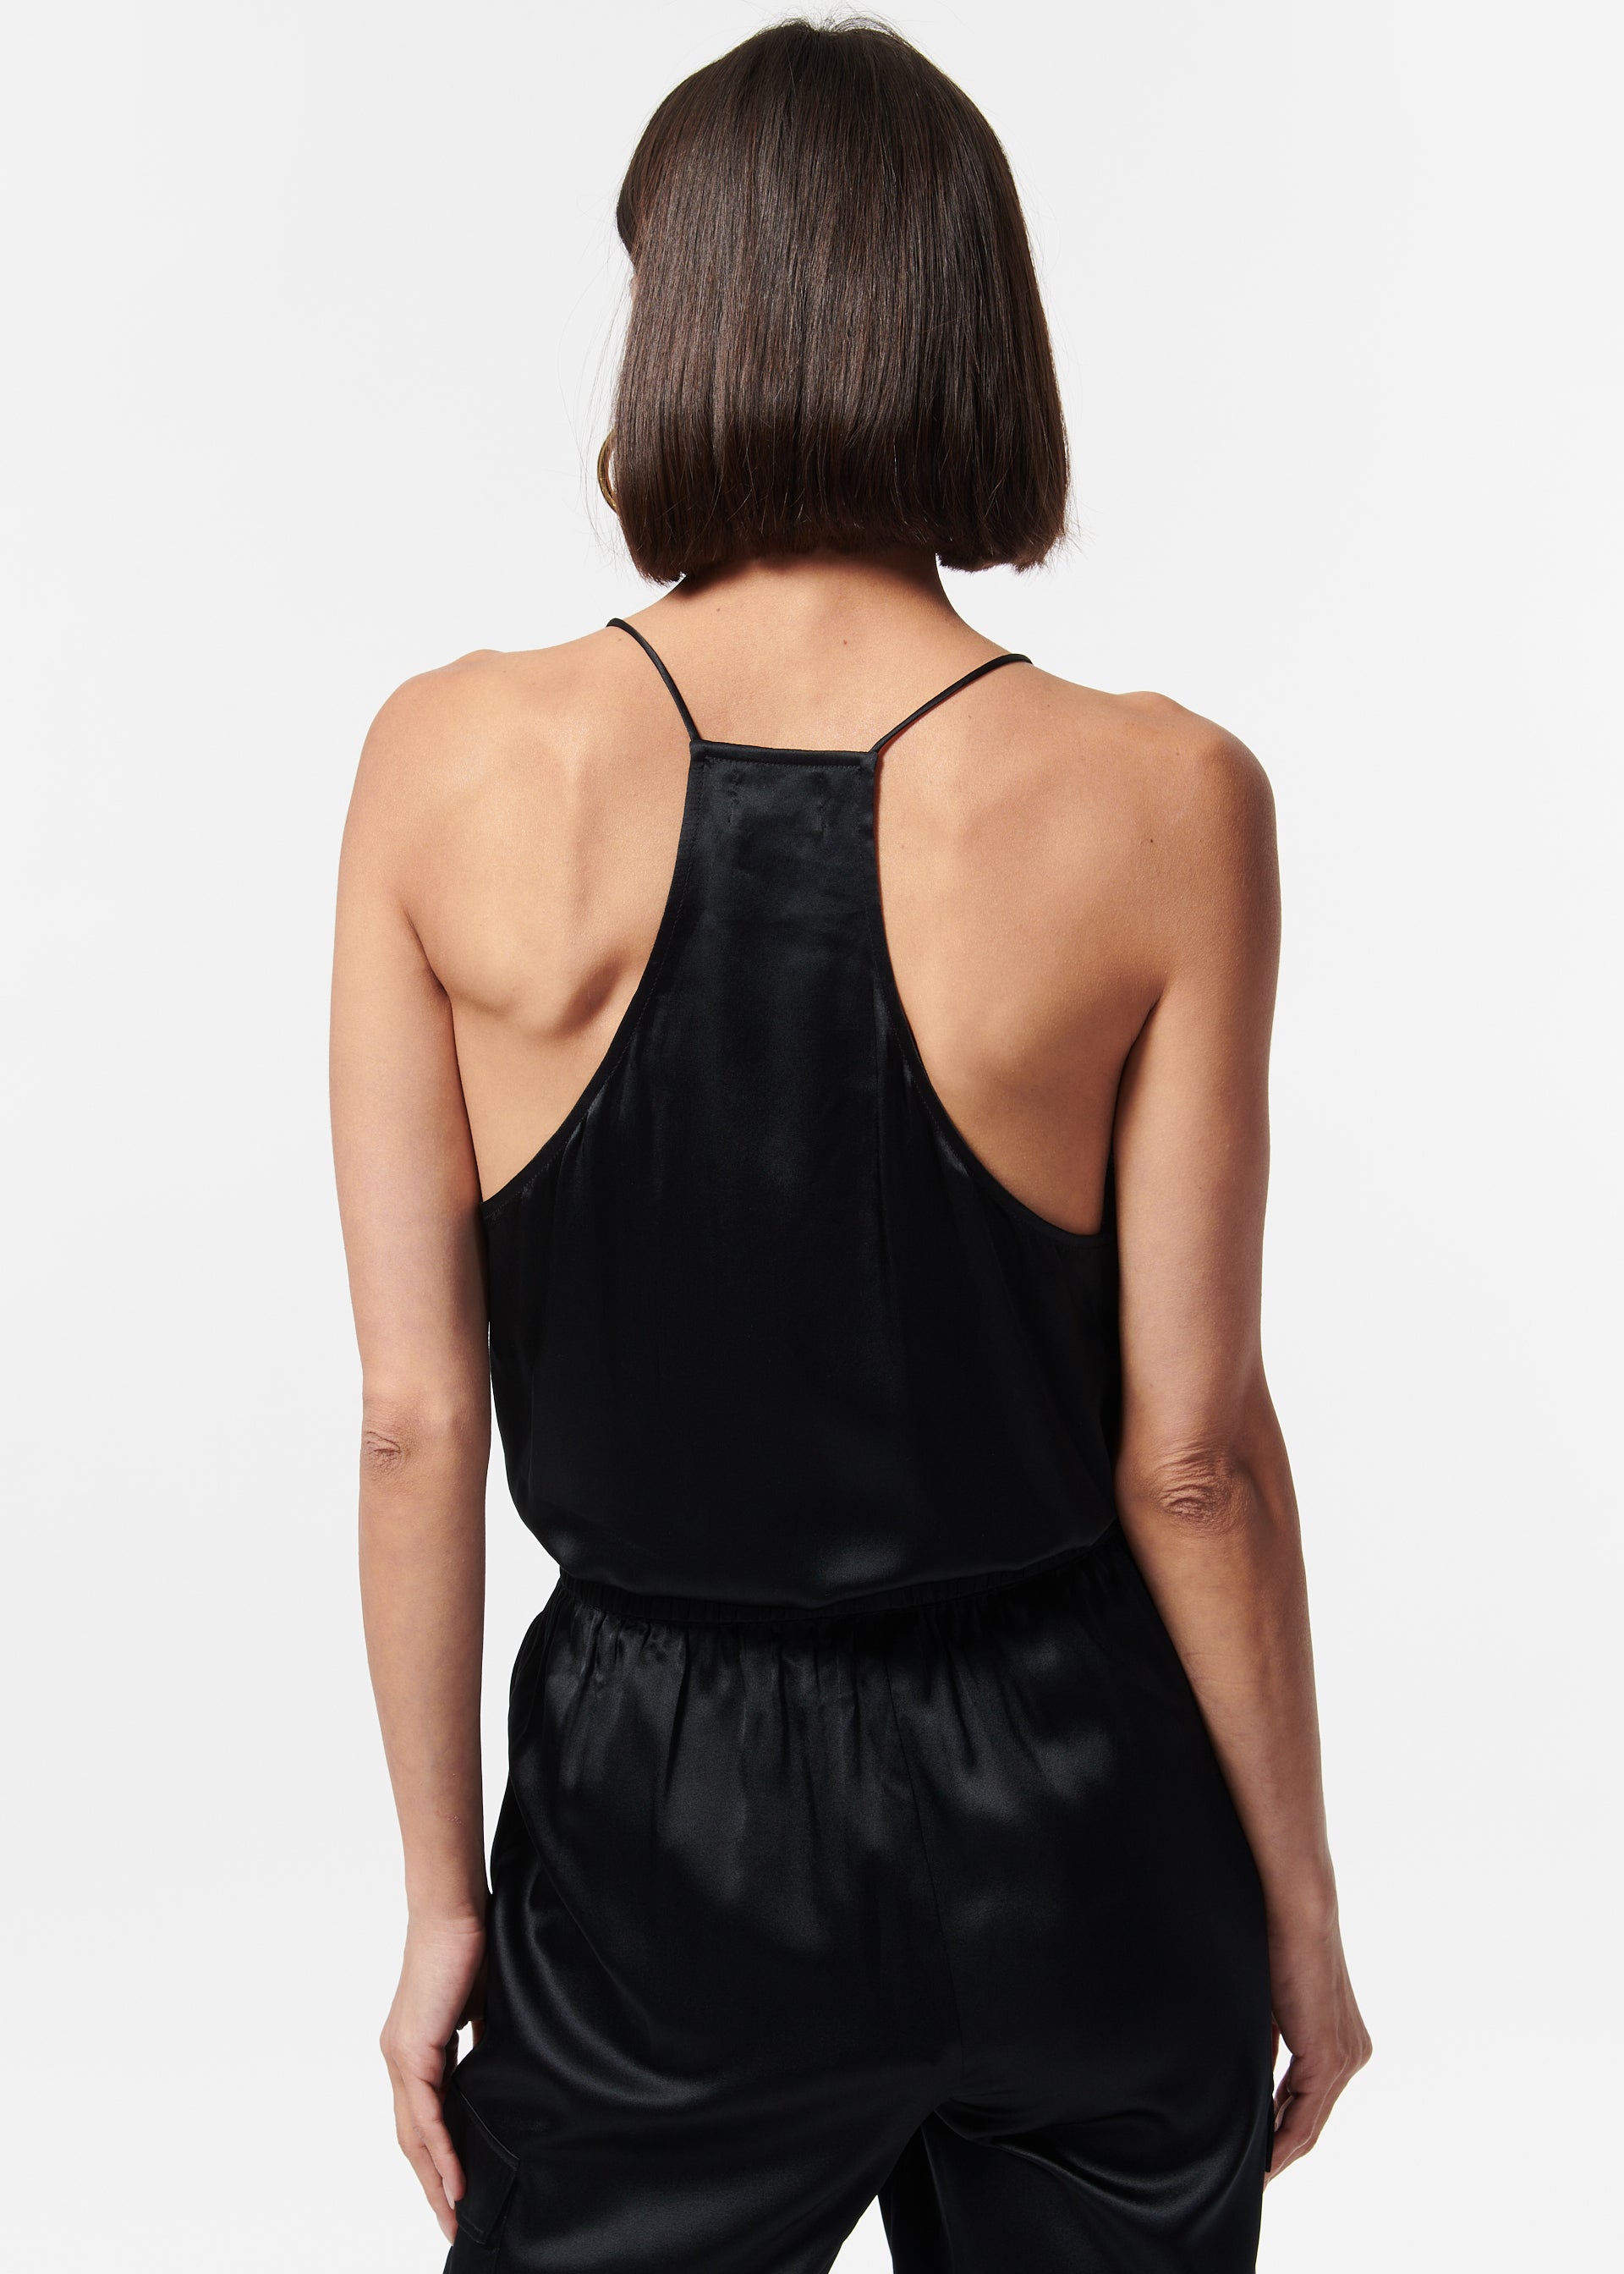 Racer Cami Top by Cami NYC